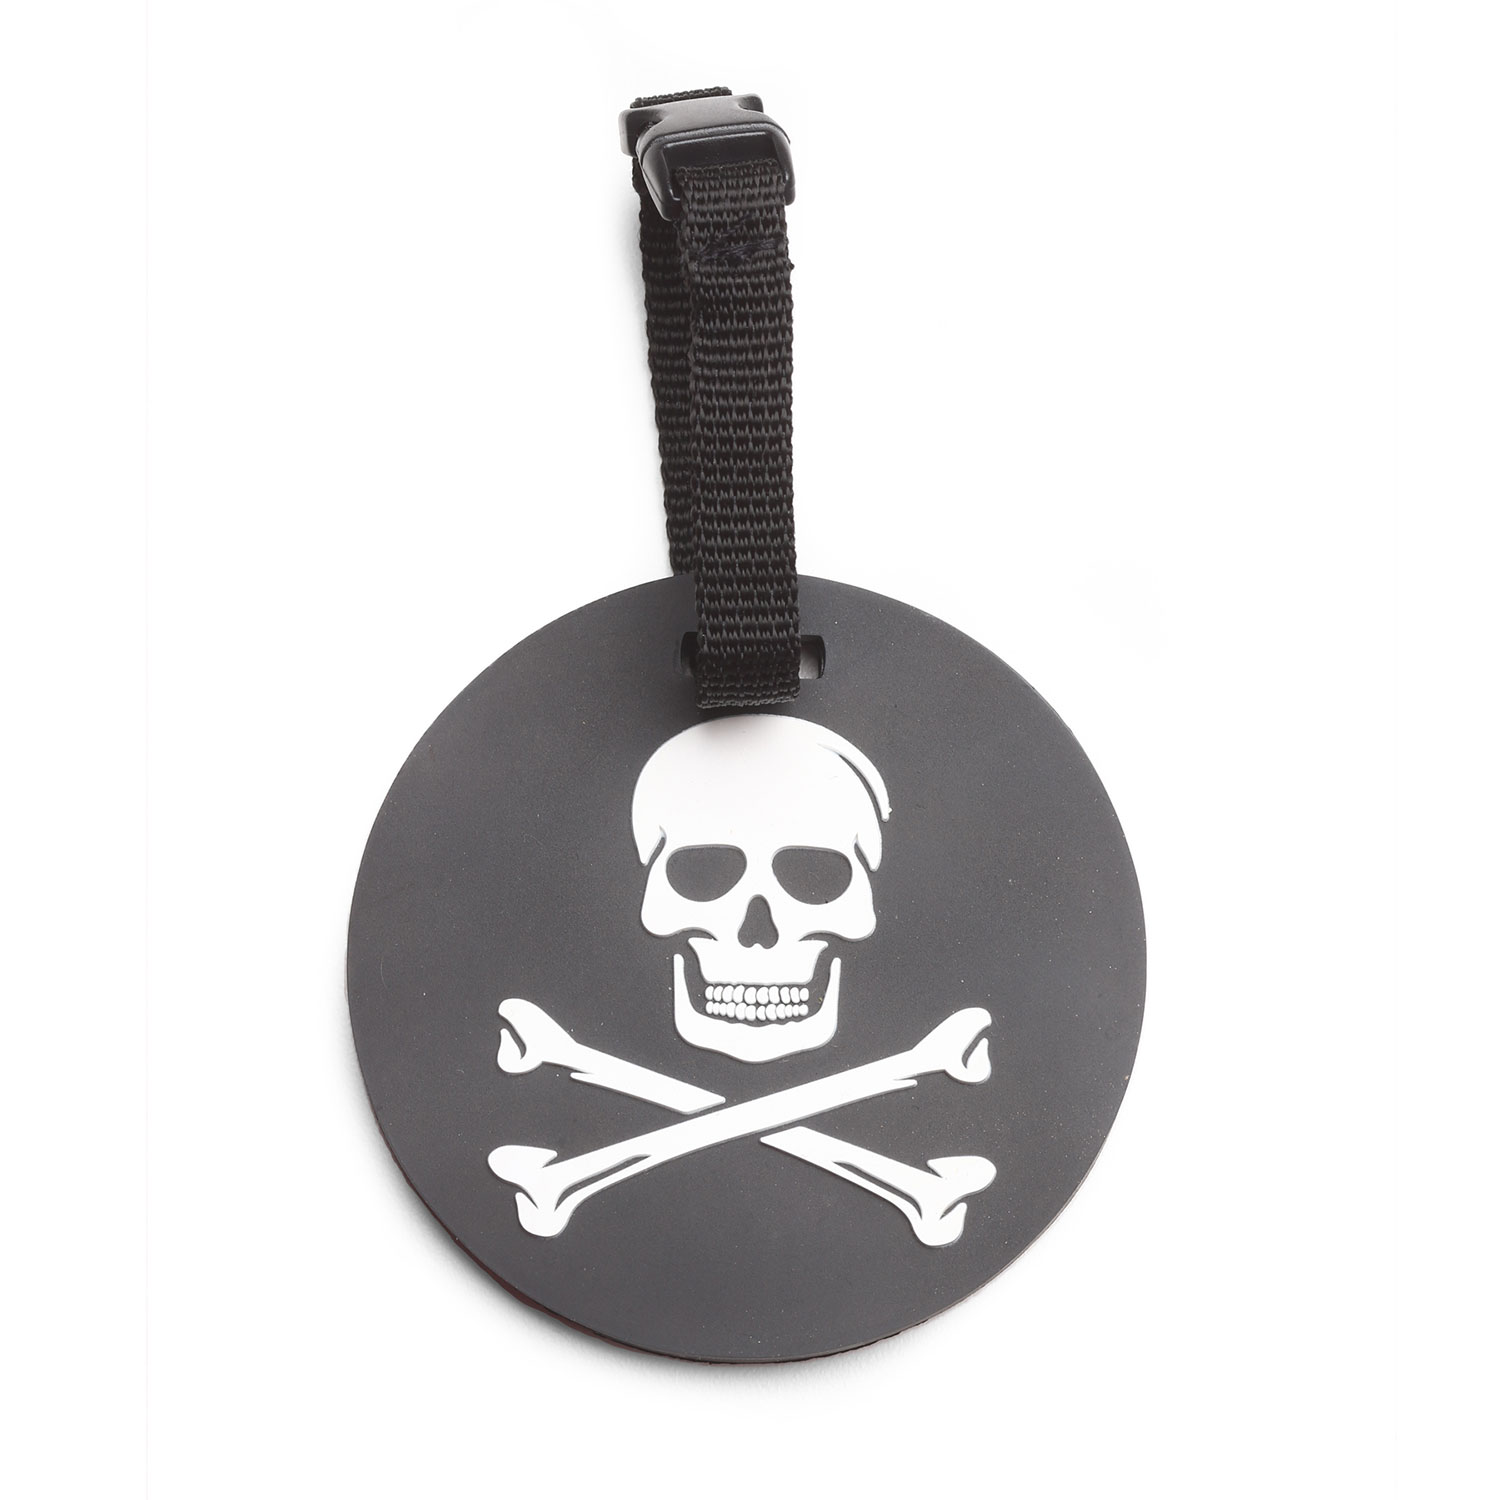 5ive Star Gear “Jolly Roger” Luggage Tag